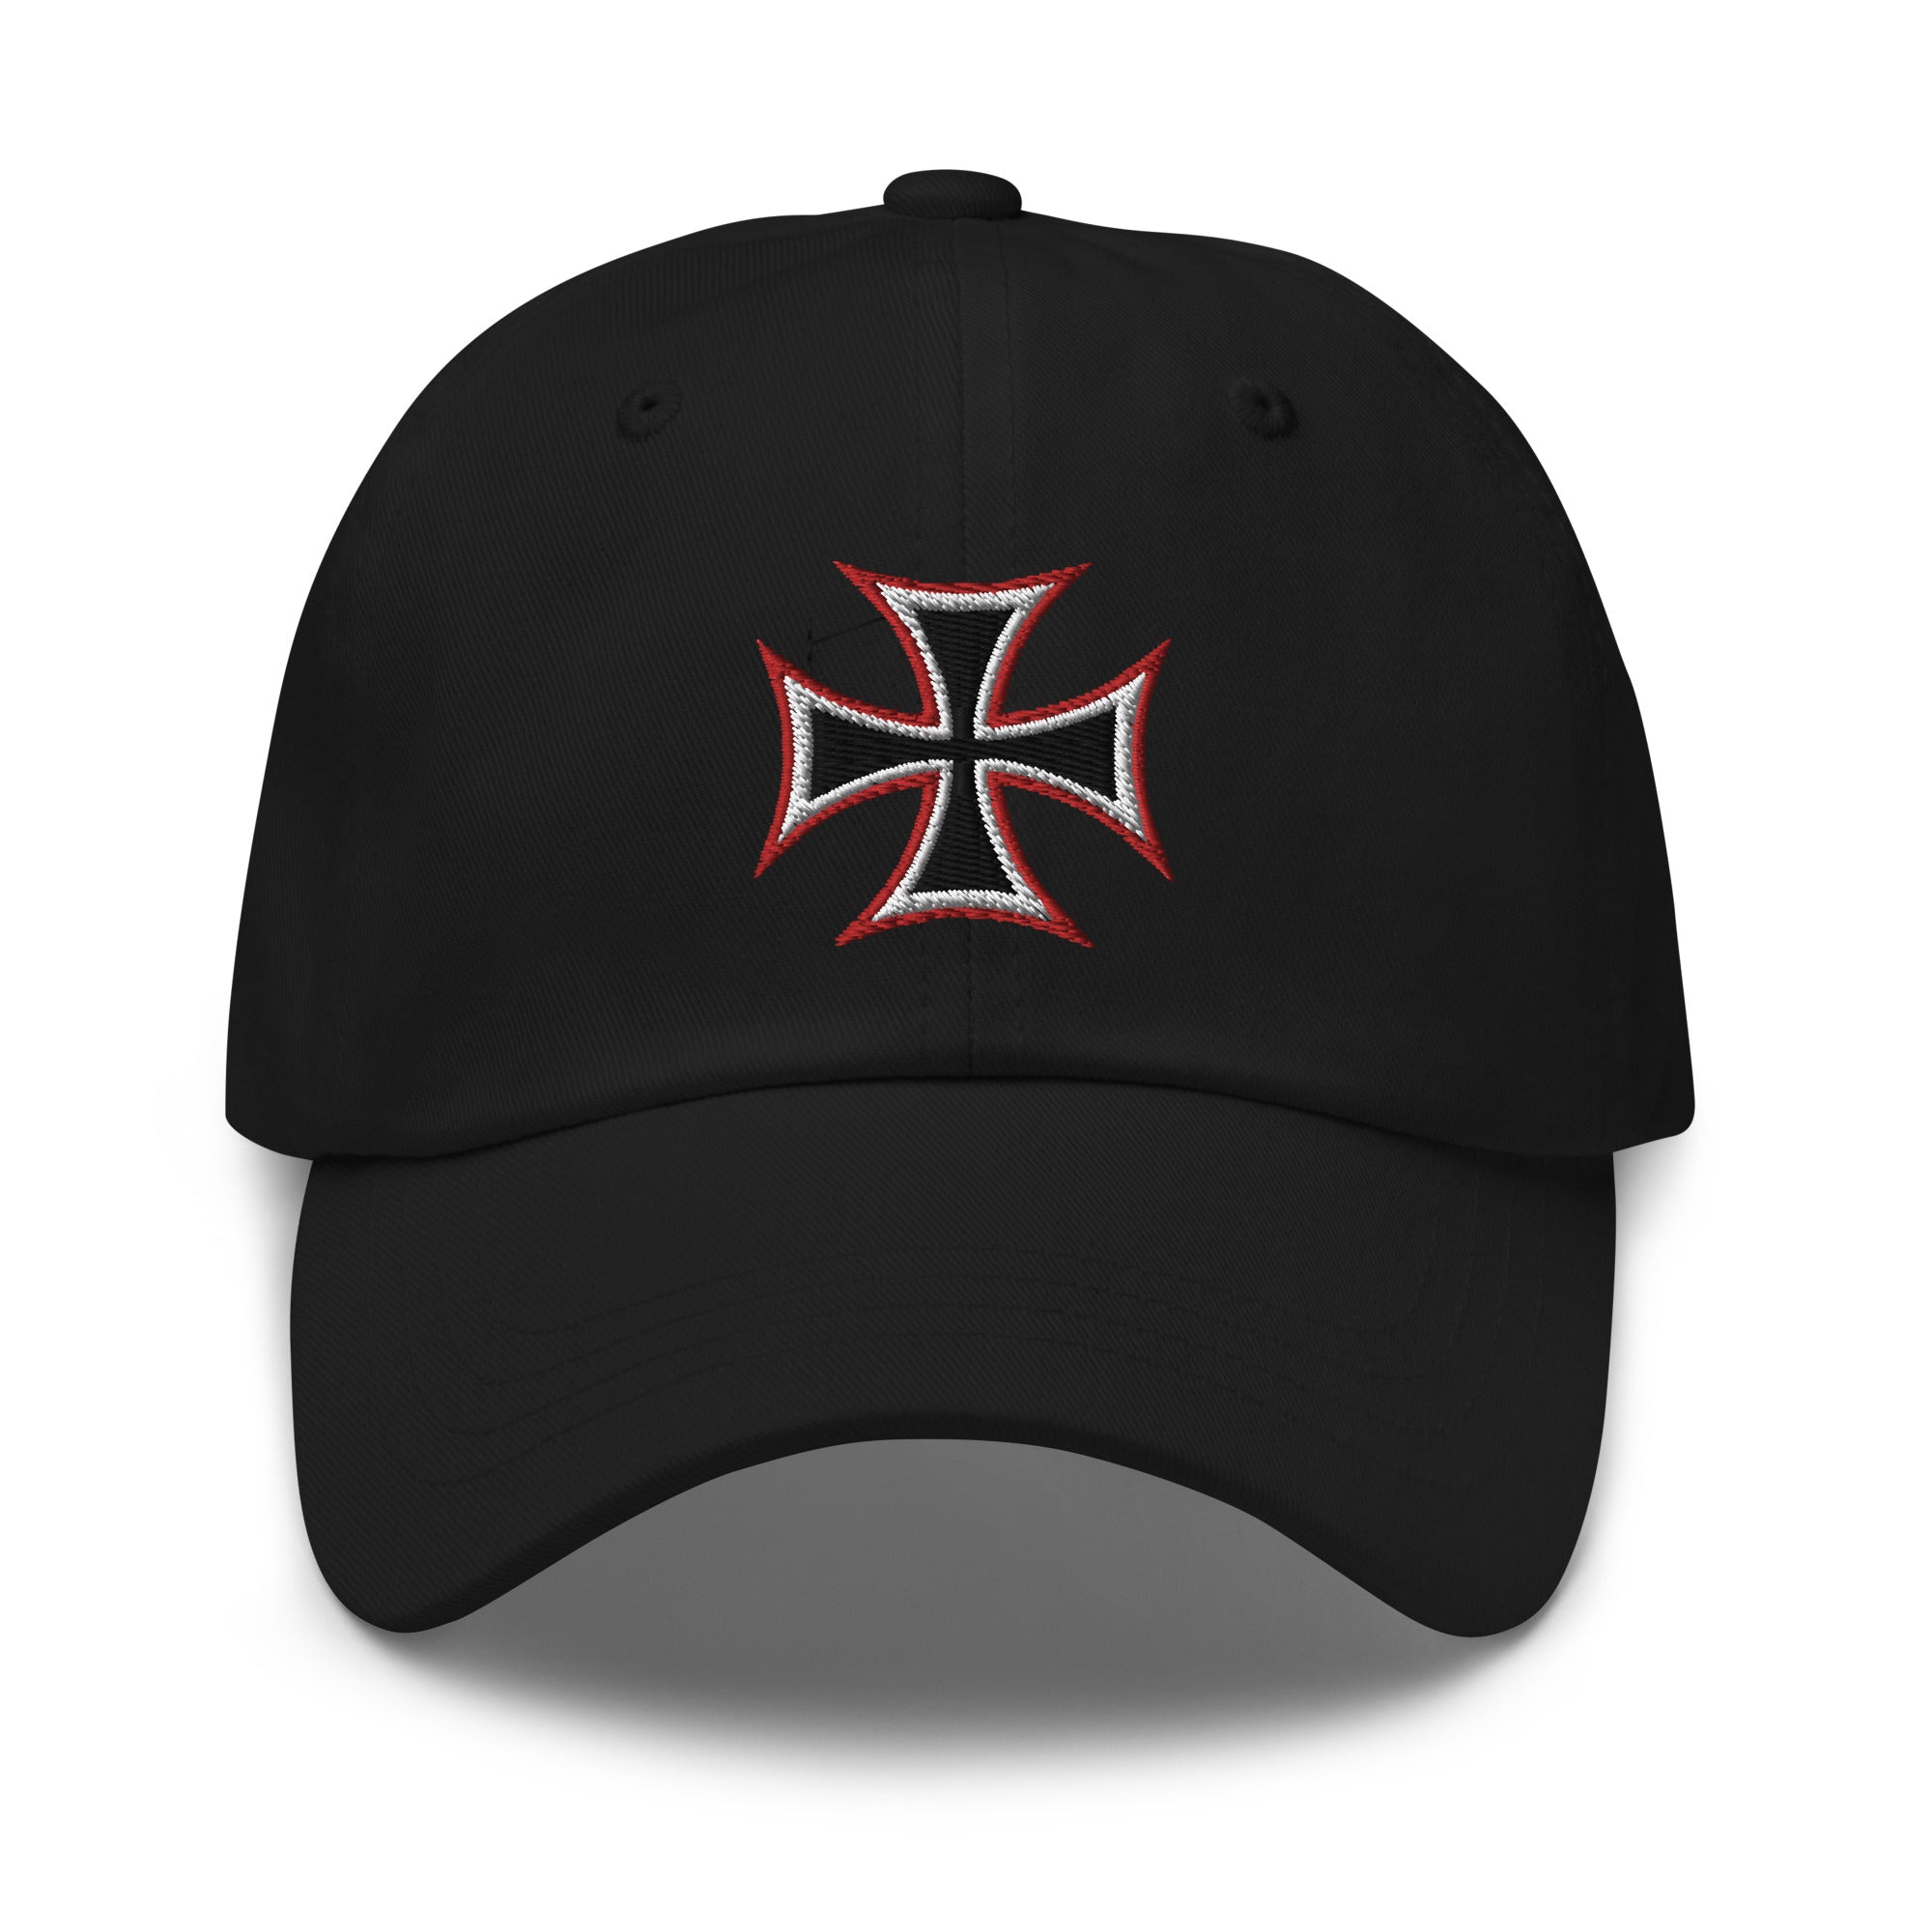 WWII Style Iron Cross Occult Symbol Embroidered Baseball Cap Dad hat - Edge of Life Designs